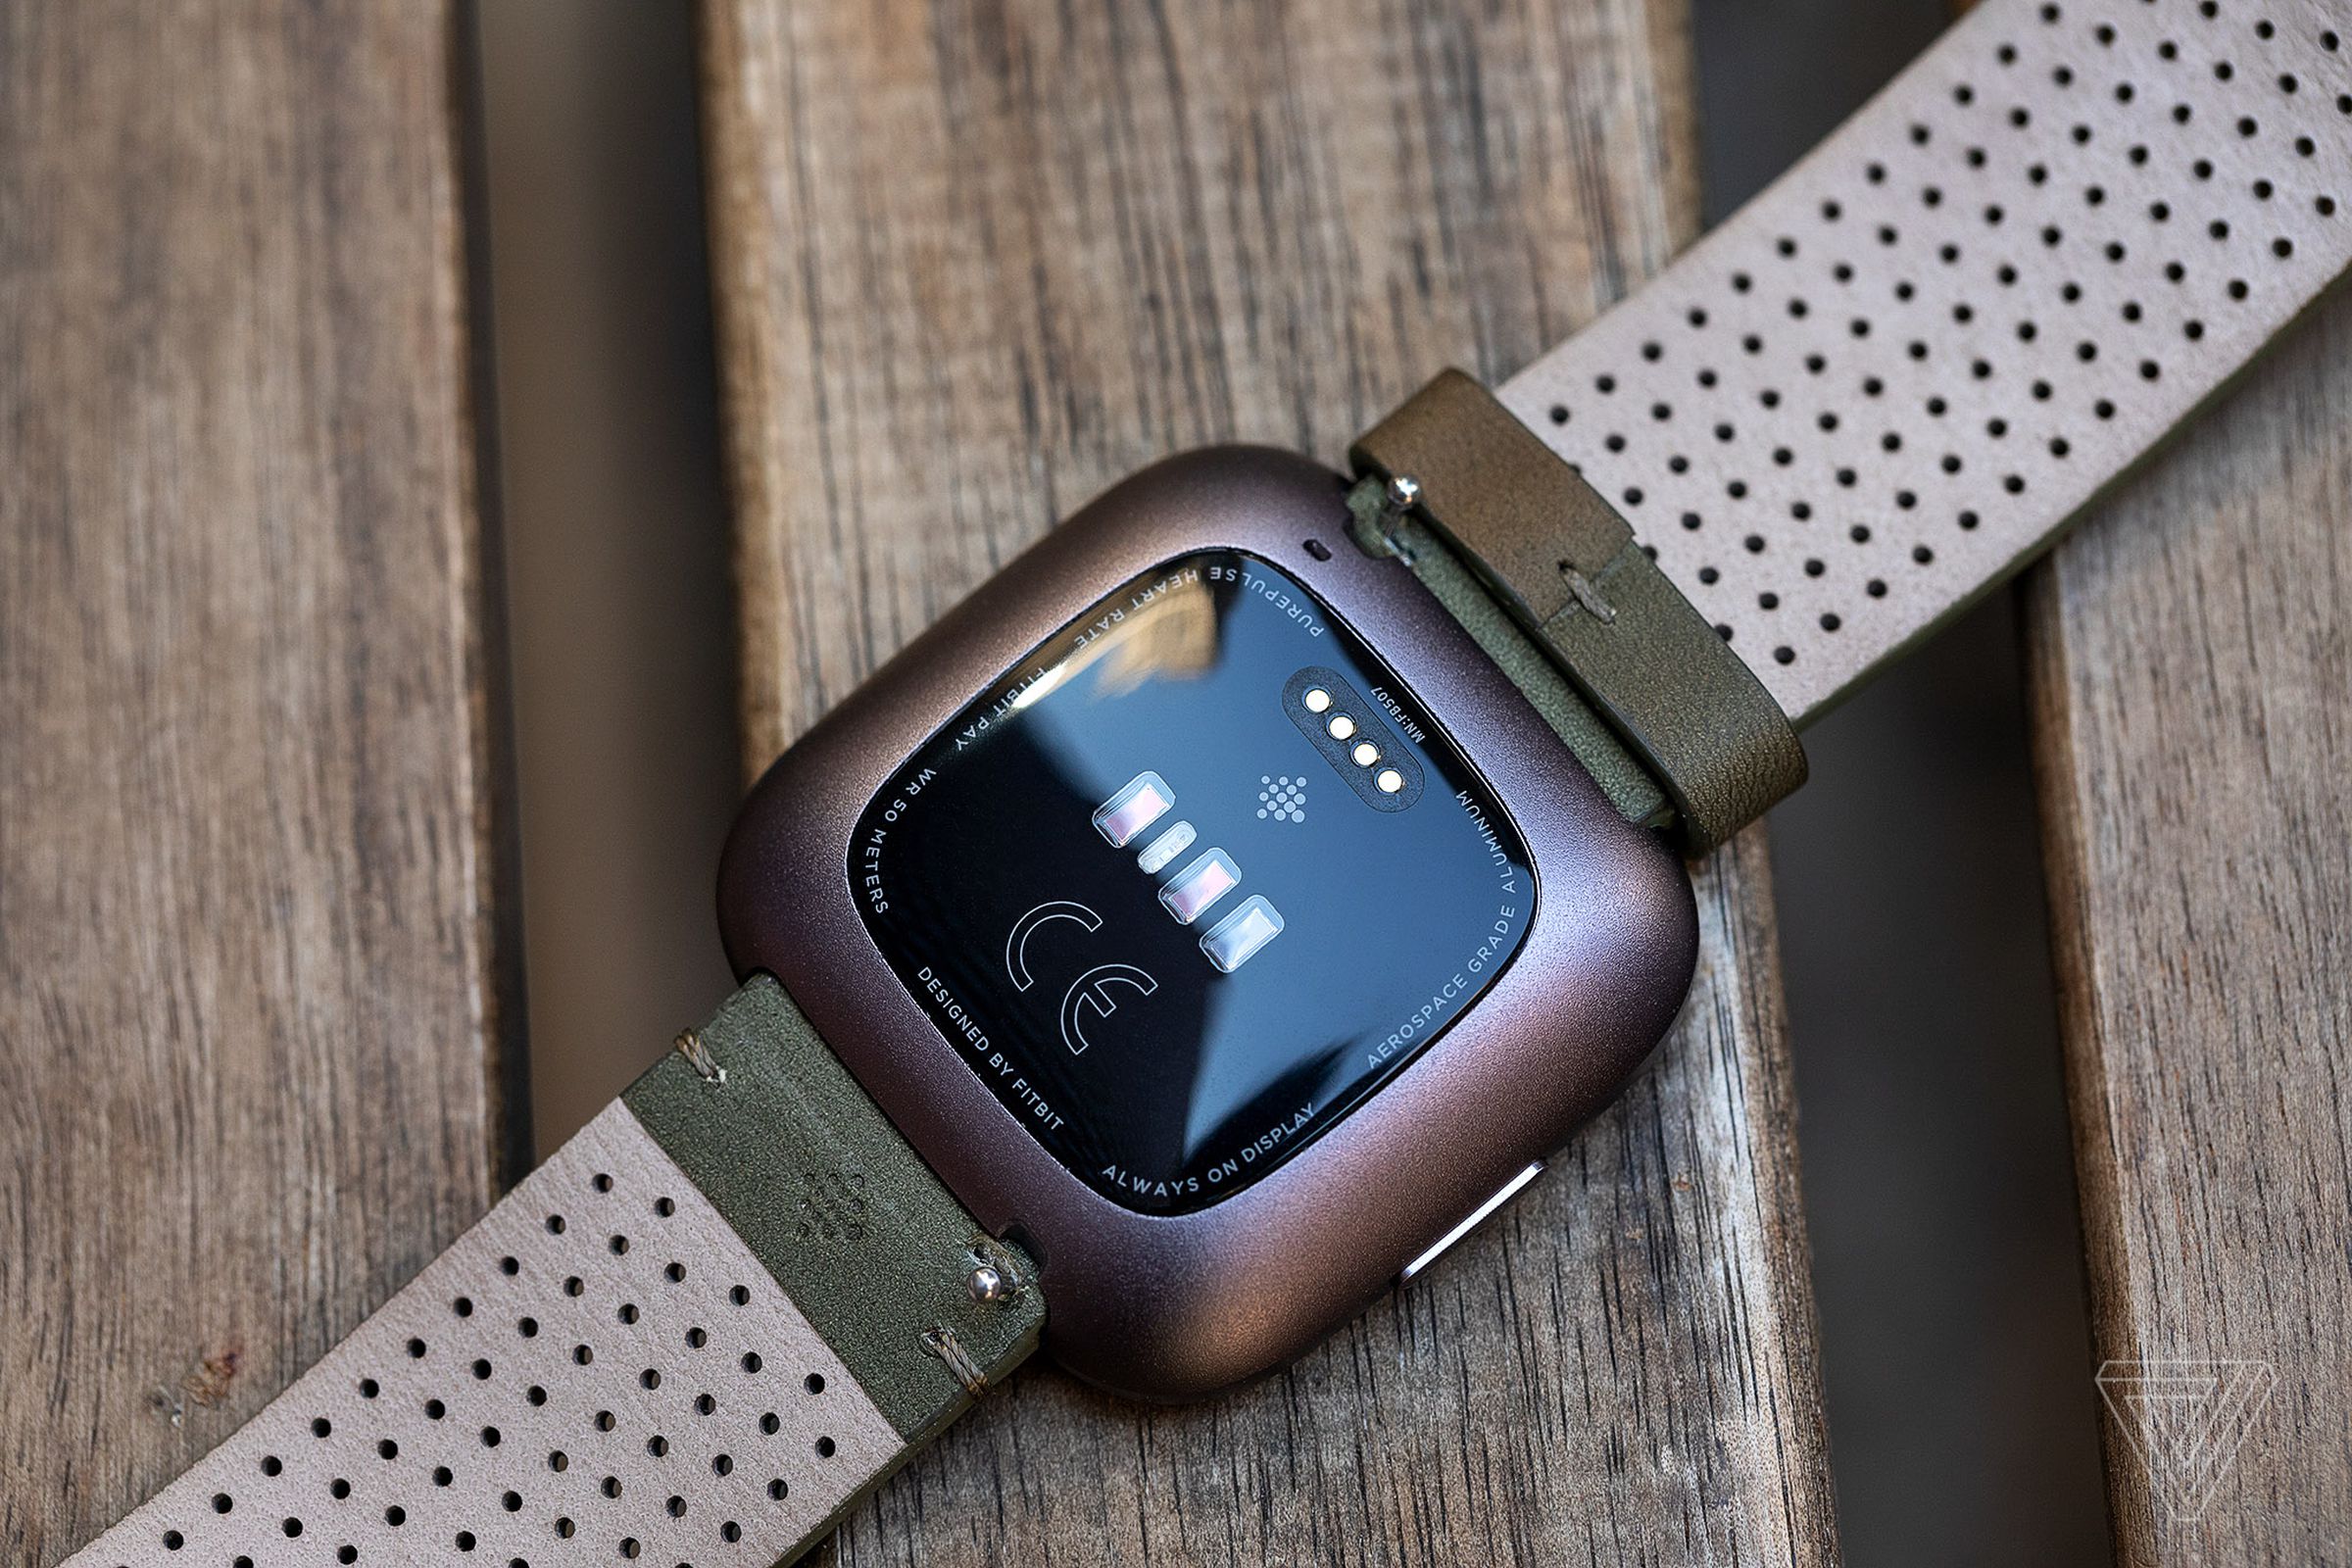 The Versa 2 has always-on heart rate monitoring